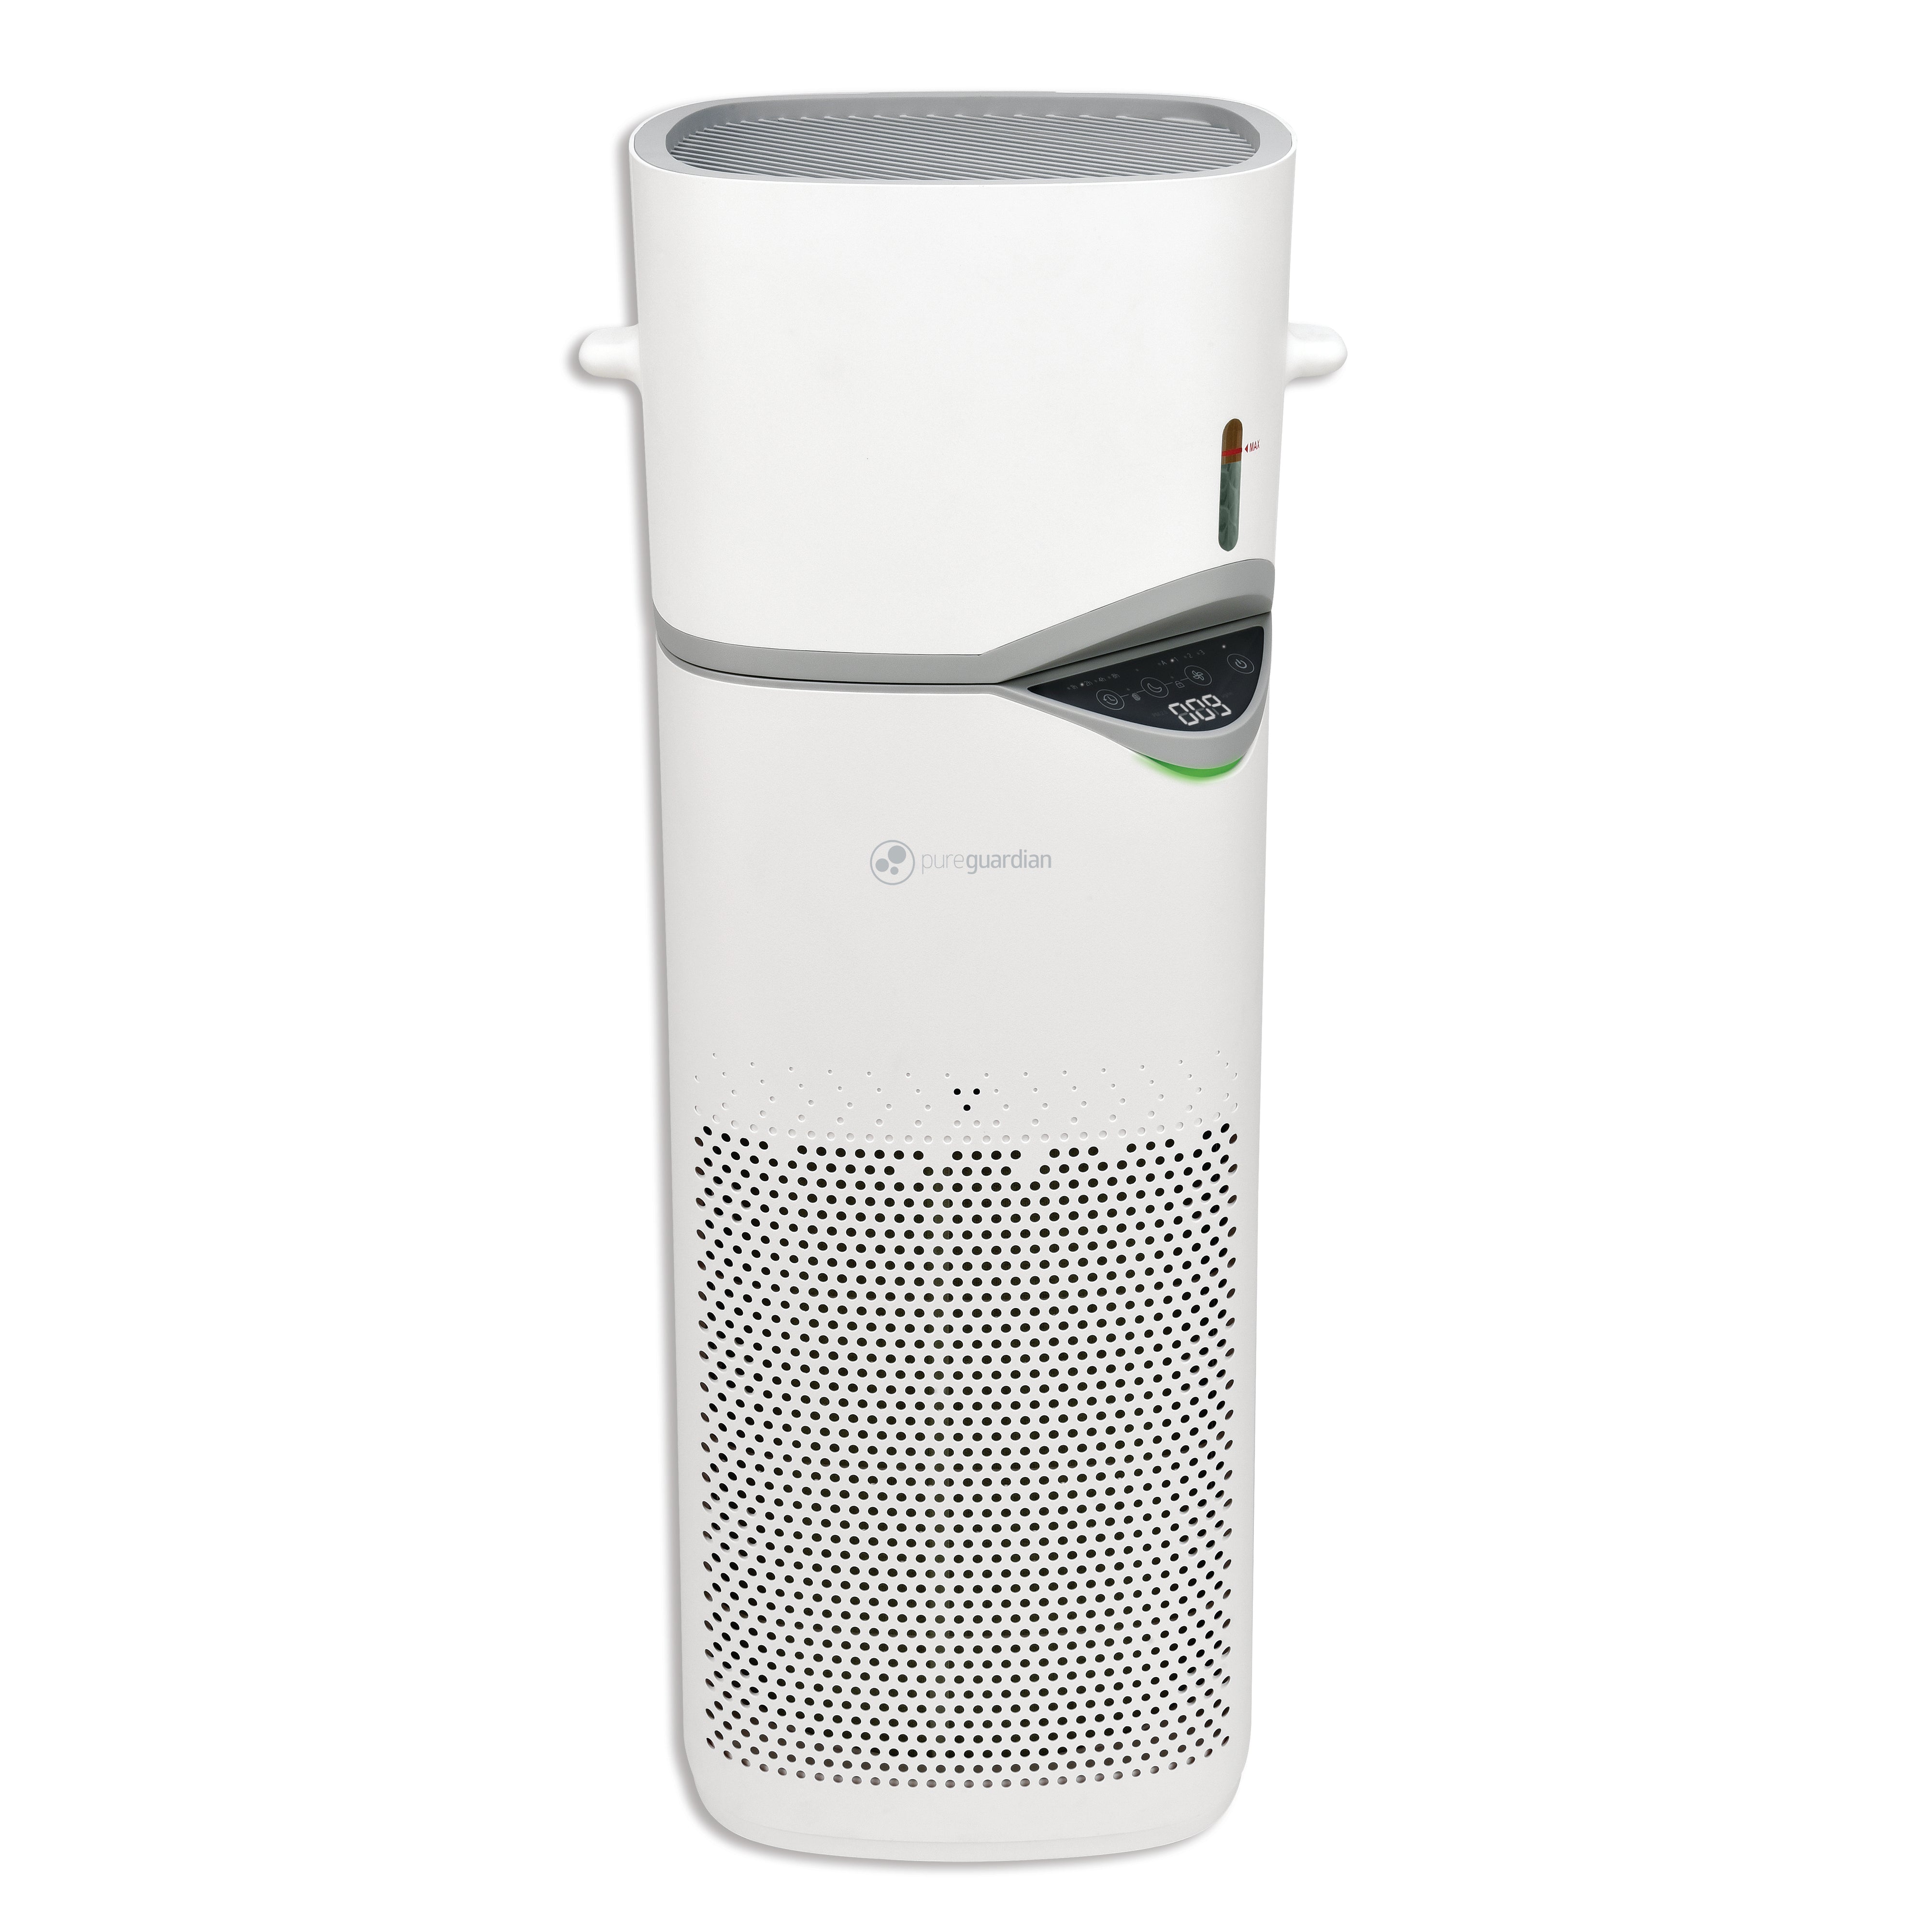 PureGuardian APH406W 2-in-1 Air Purifier with HEPA Filter and Humidifier - All Season Console for Large Rooms